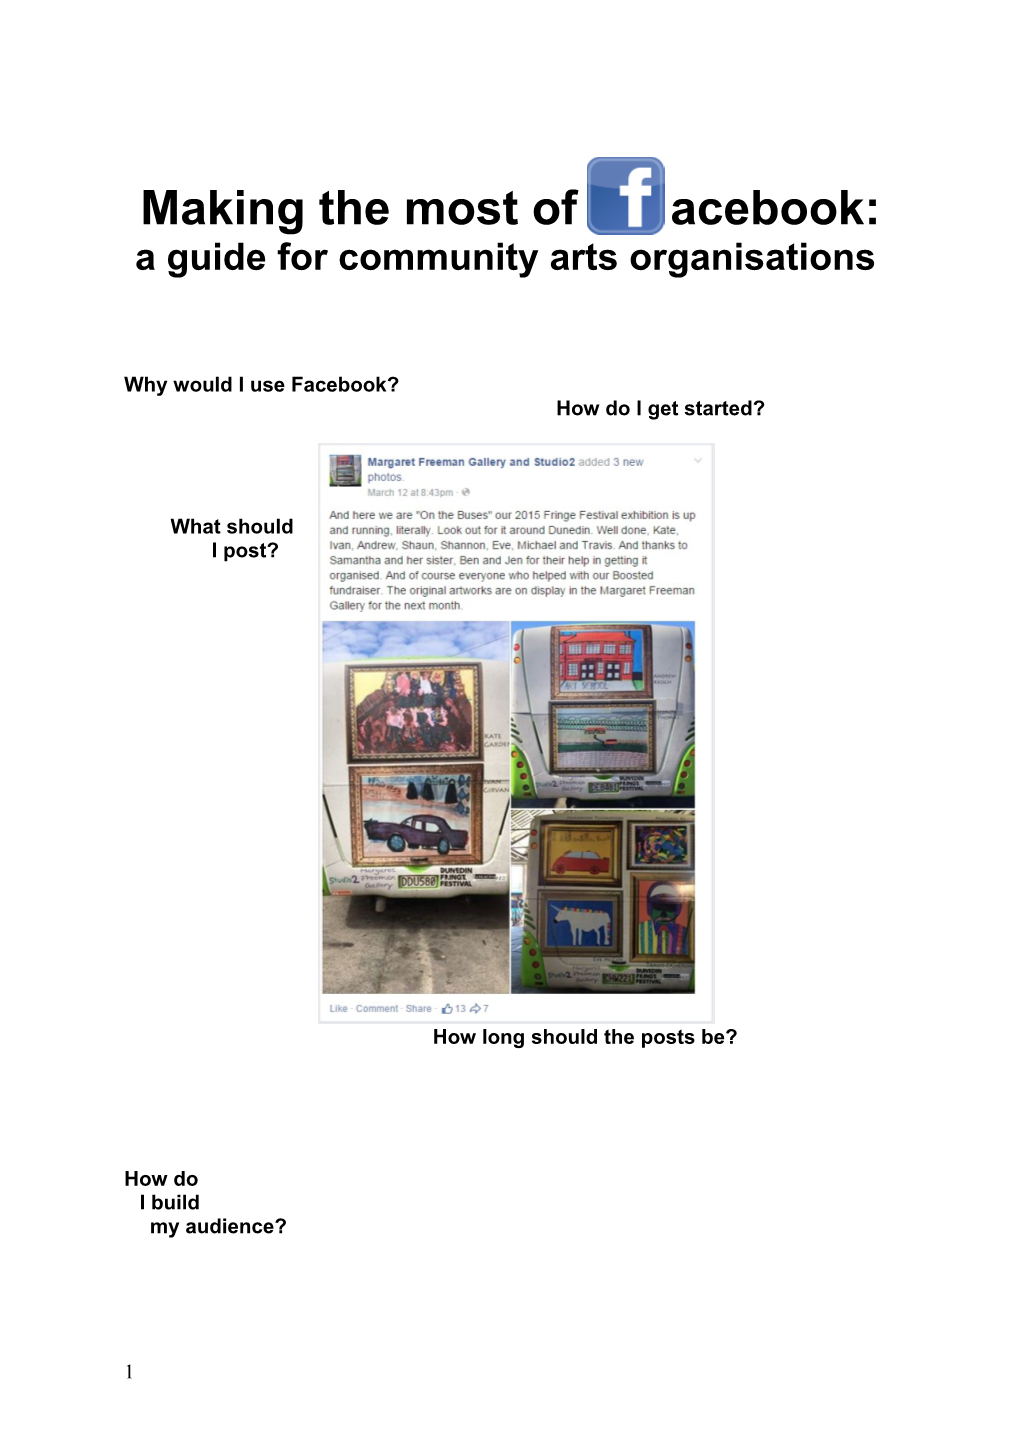 A Guide for Community Arts Organisations